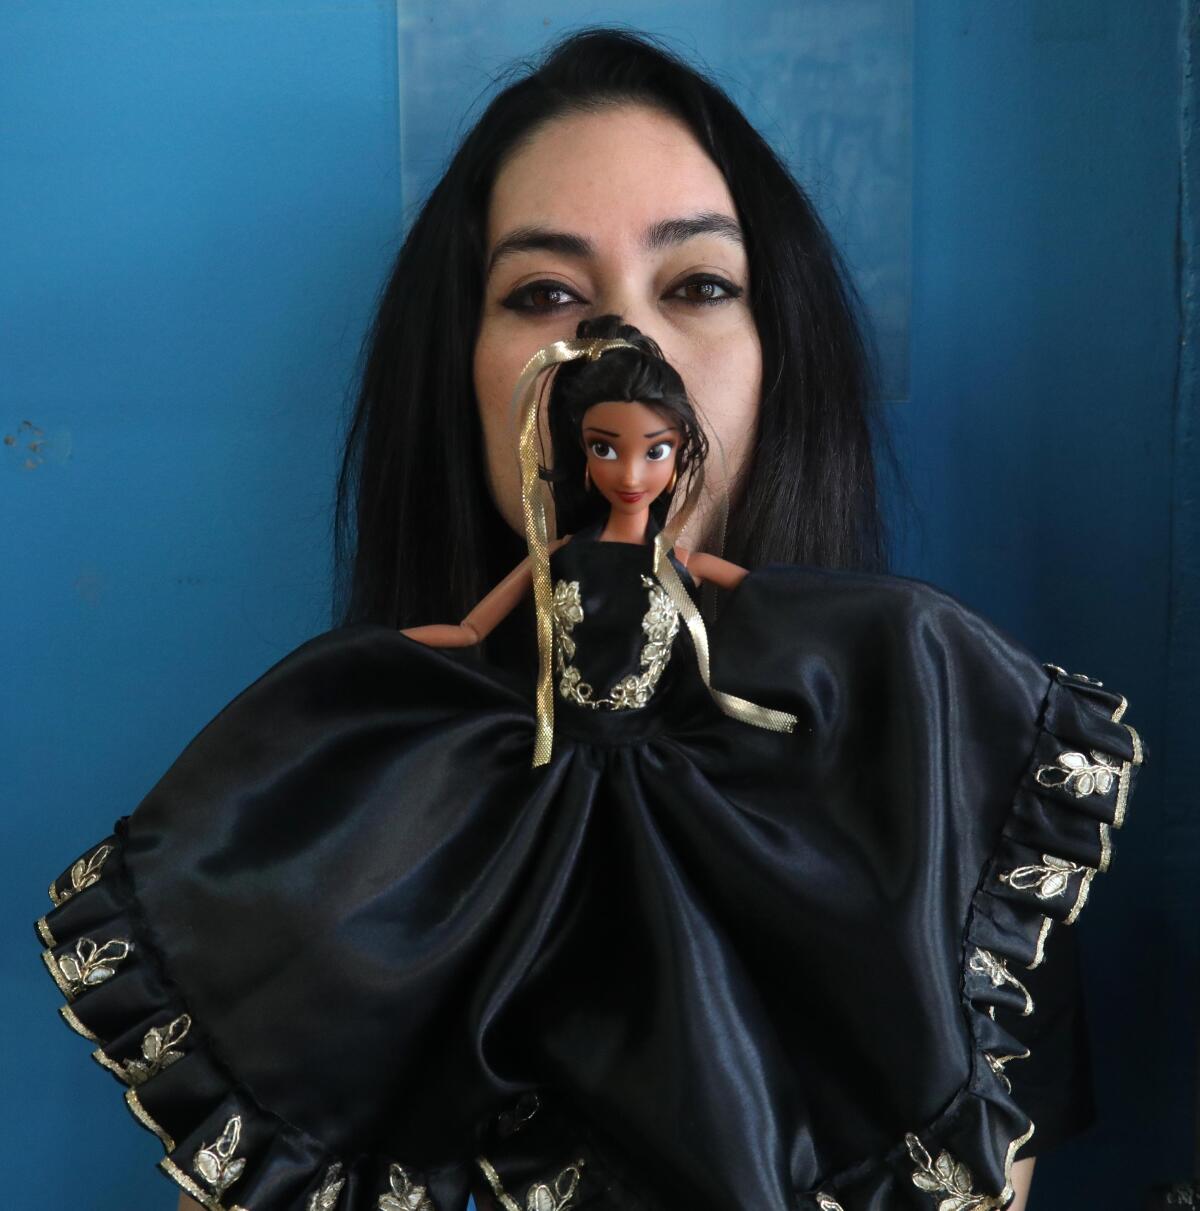 Latina comic book creator Kayden Phoenix stands behind a doll based on the main character of her graphic novel